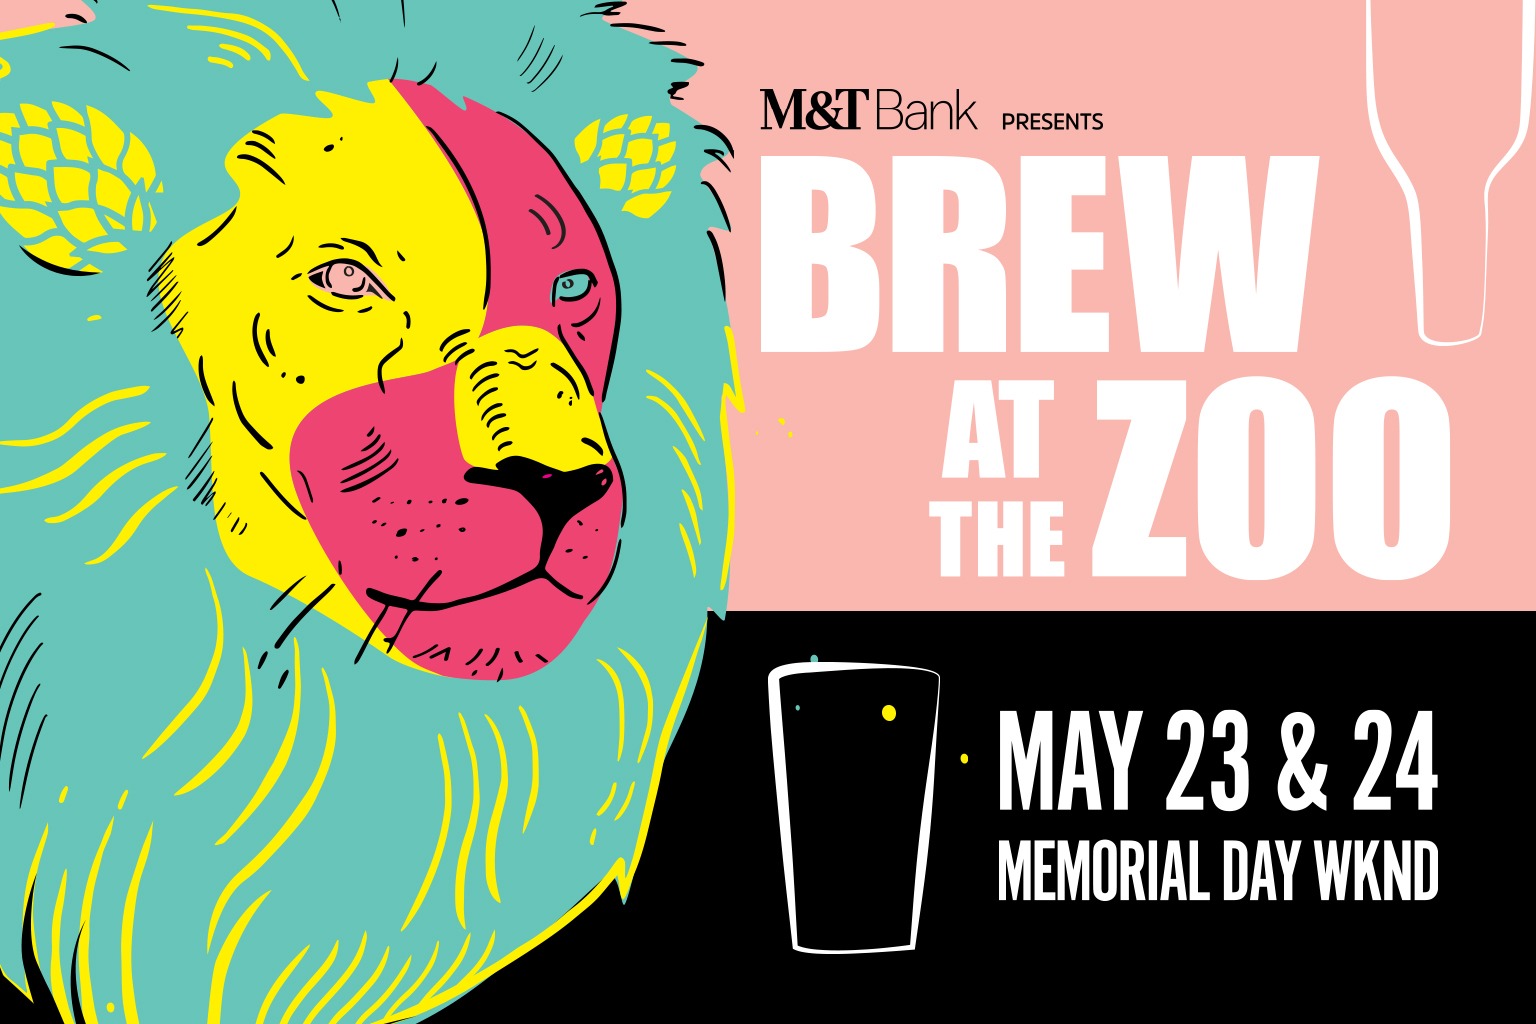 Brew at the Zoo 2020 The Maryland Zoo in Baltimore